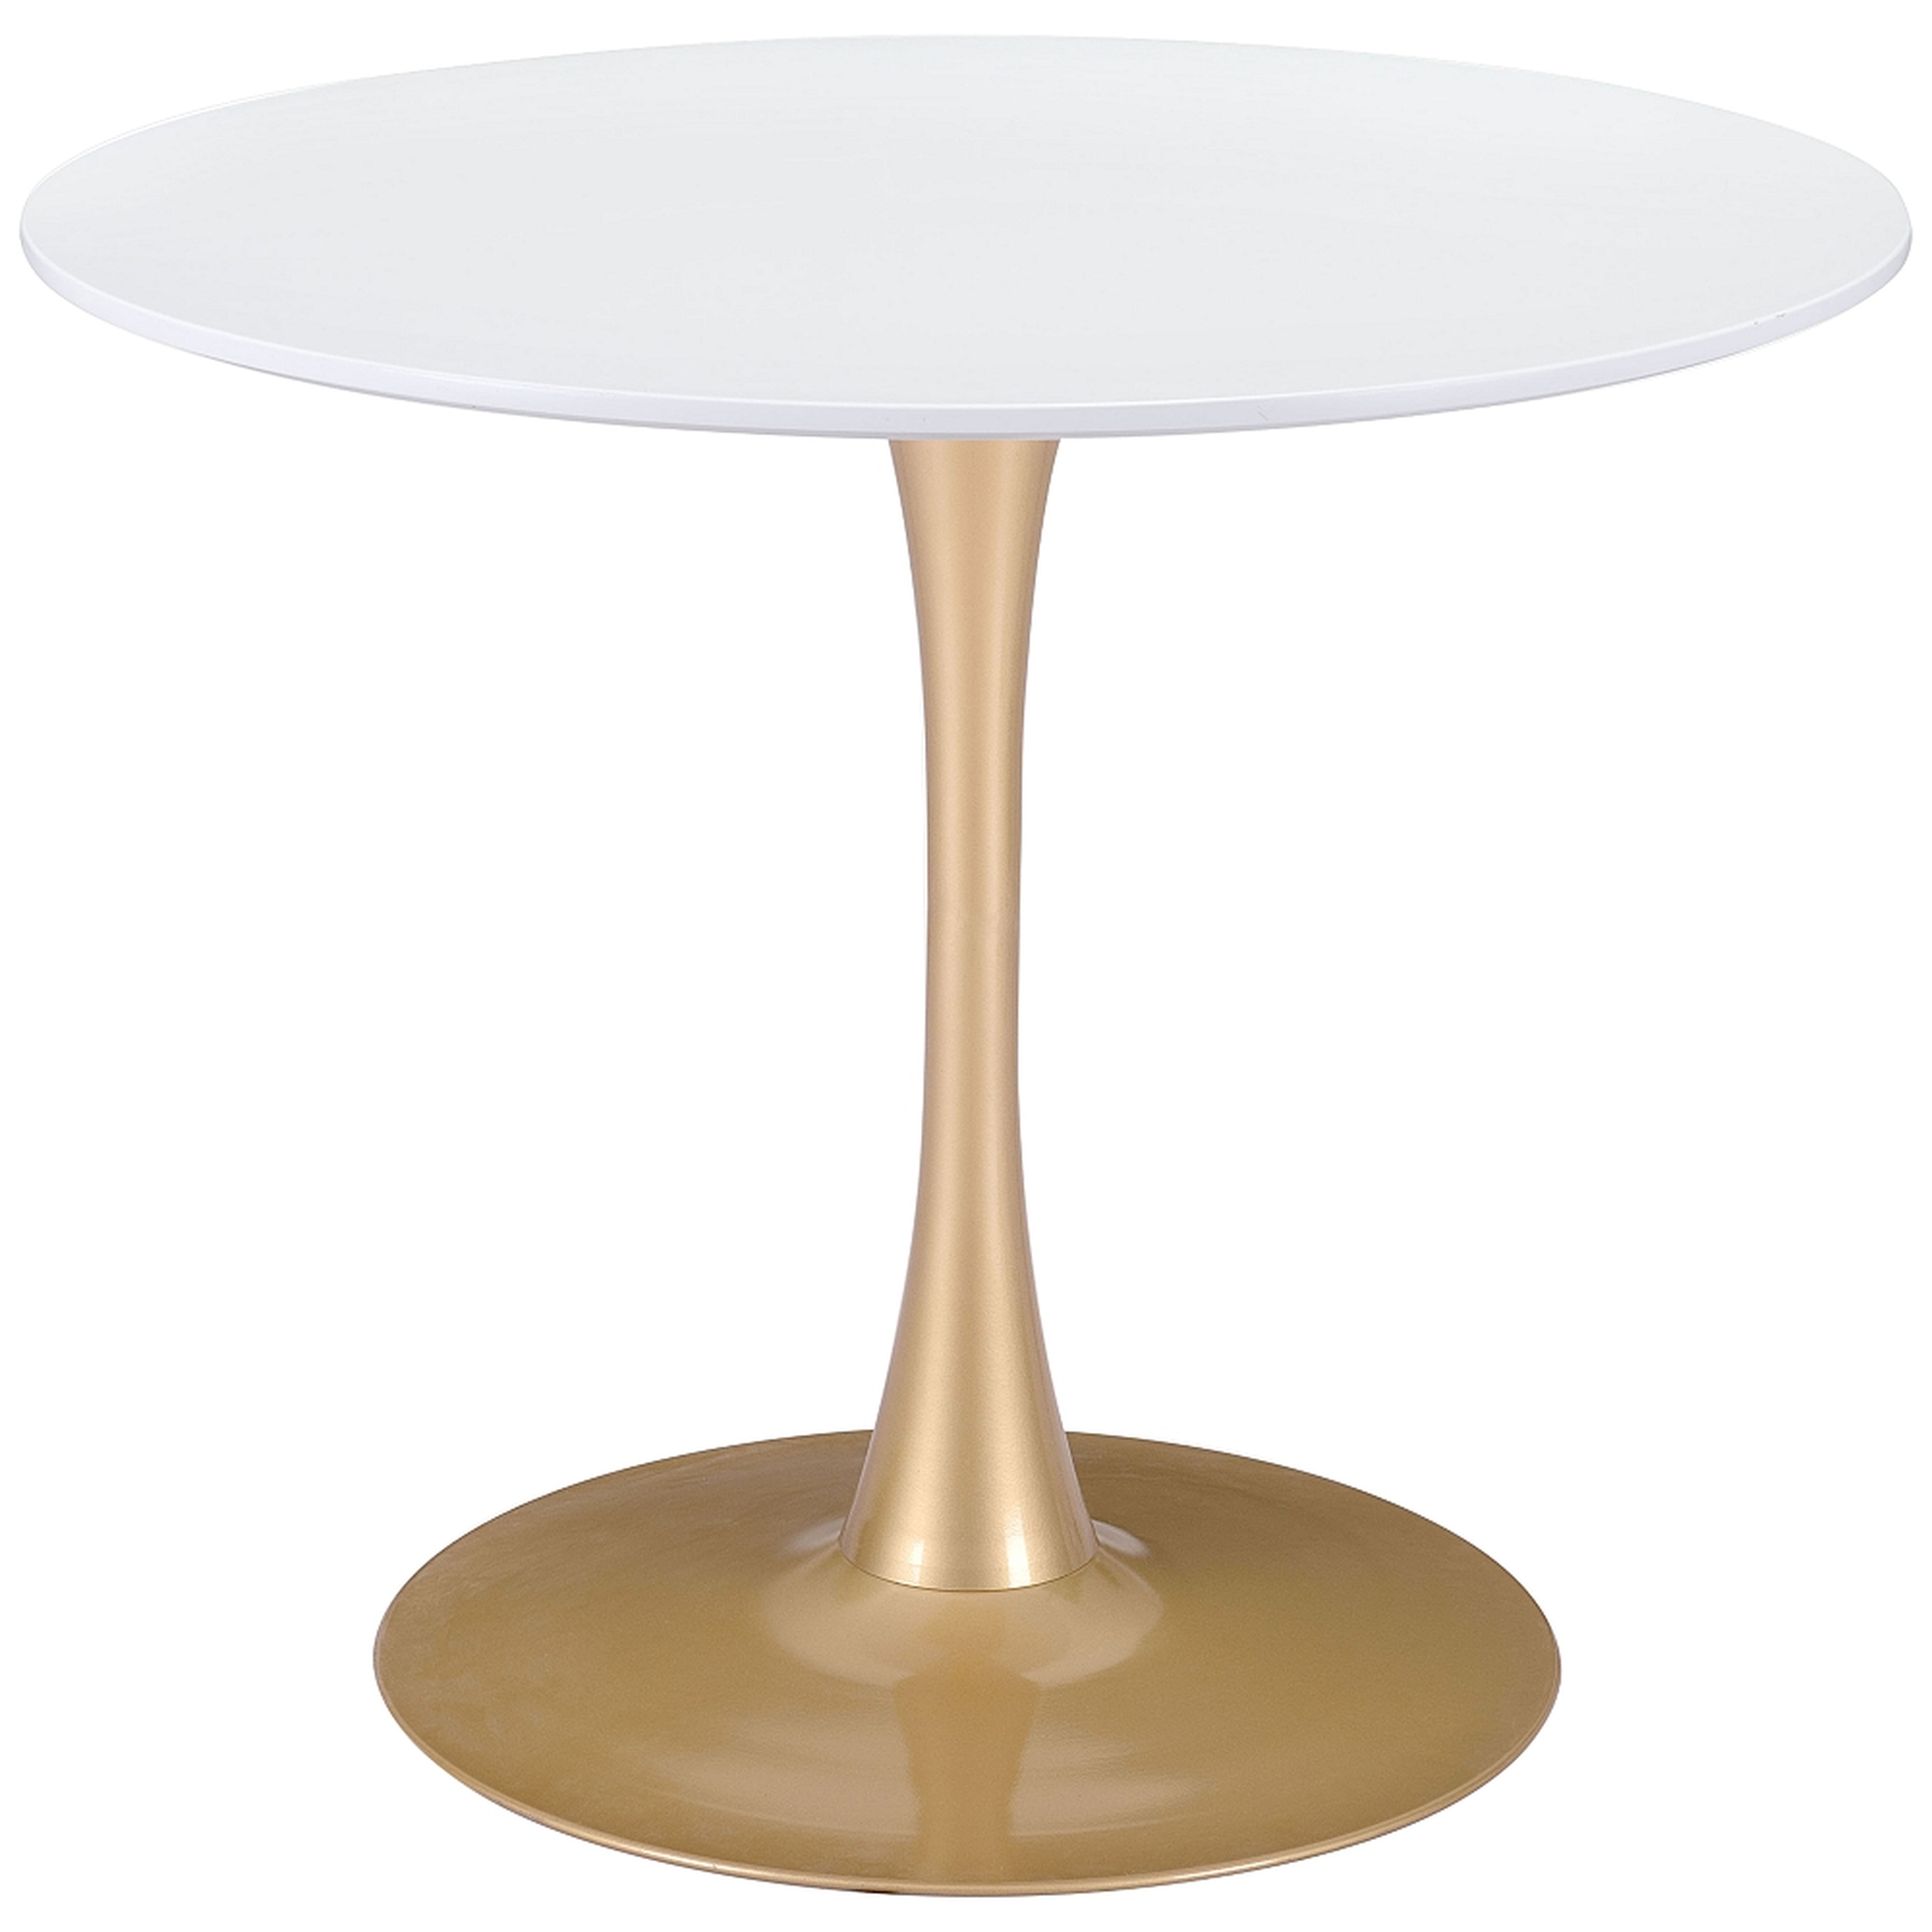 Zuo Opus 35 1/2" Wide White and Gold Round Dining Table - Style # 945E0 - Lamps Plus